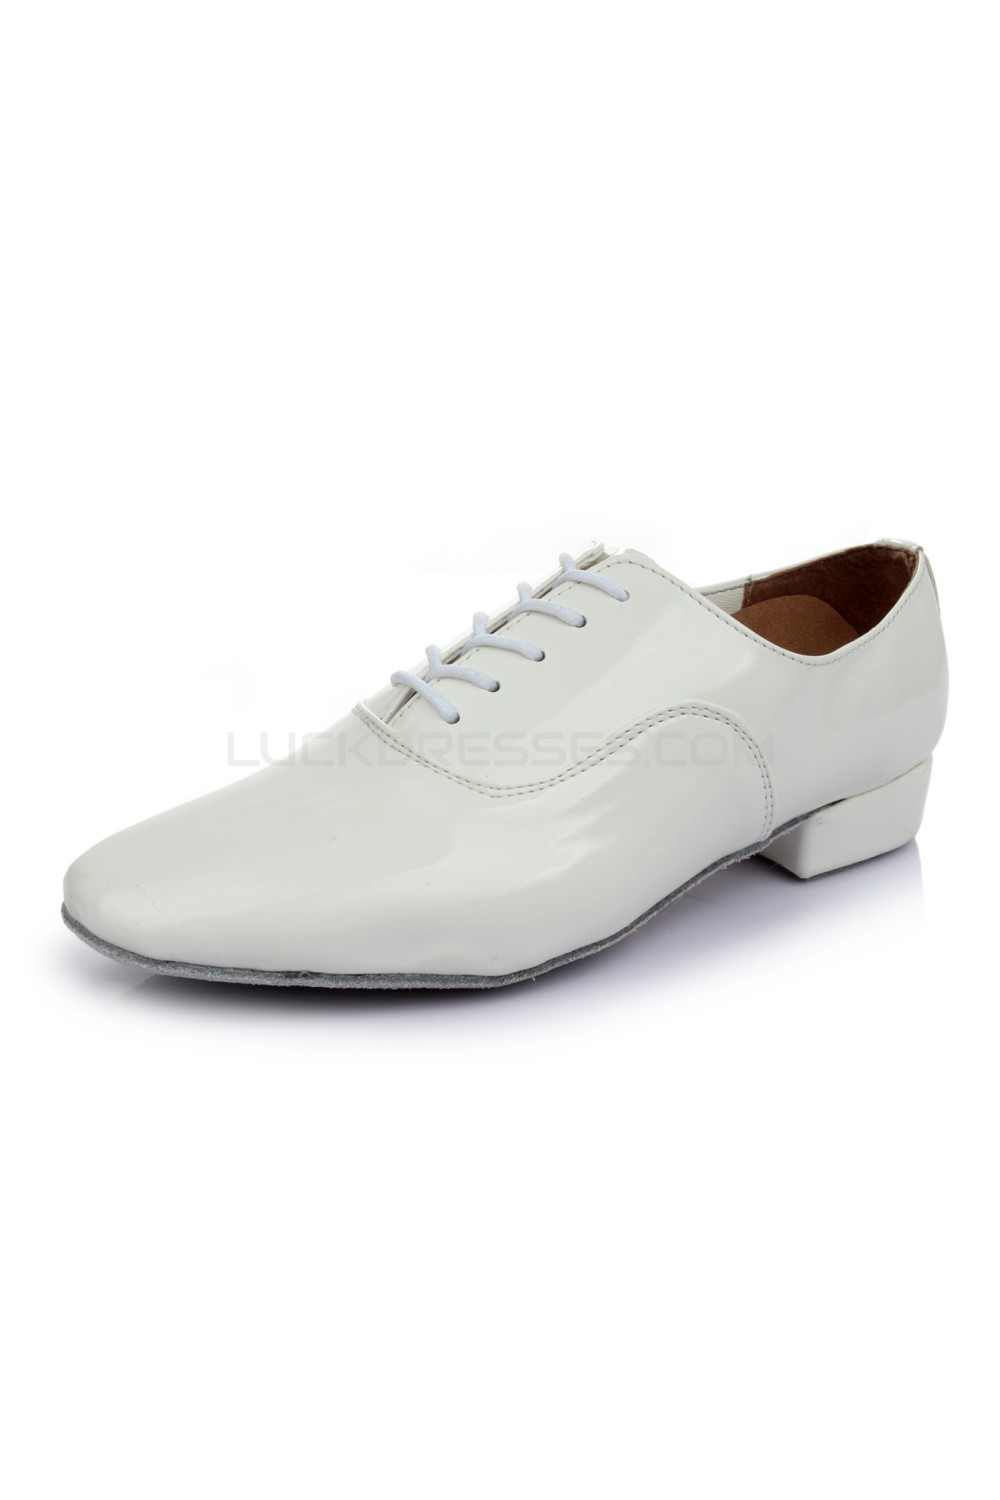 white shoes dance